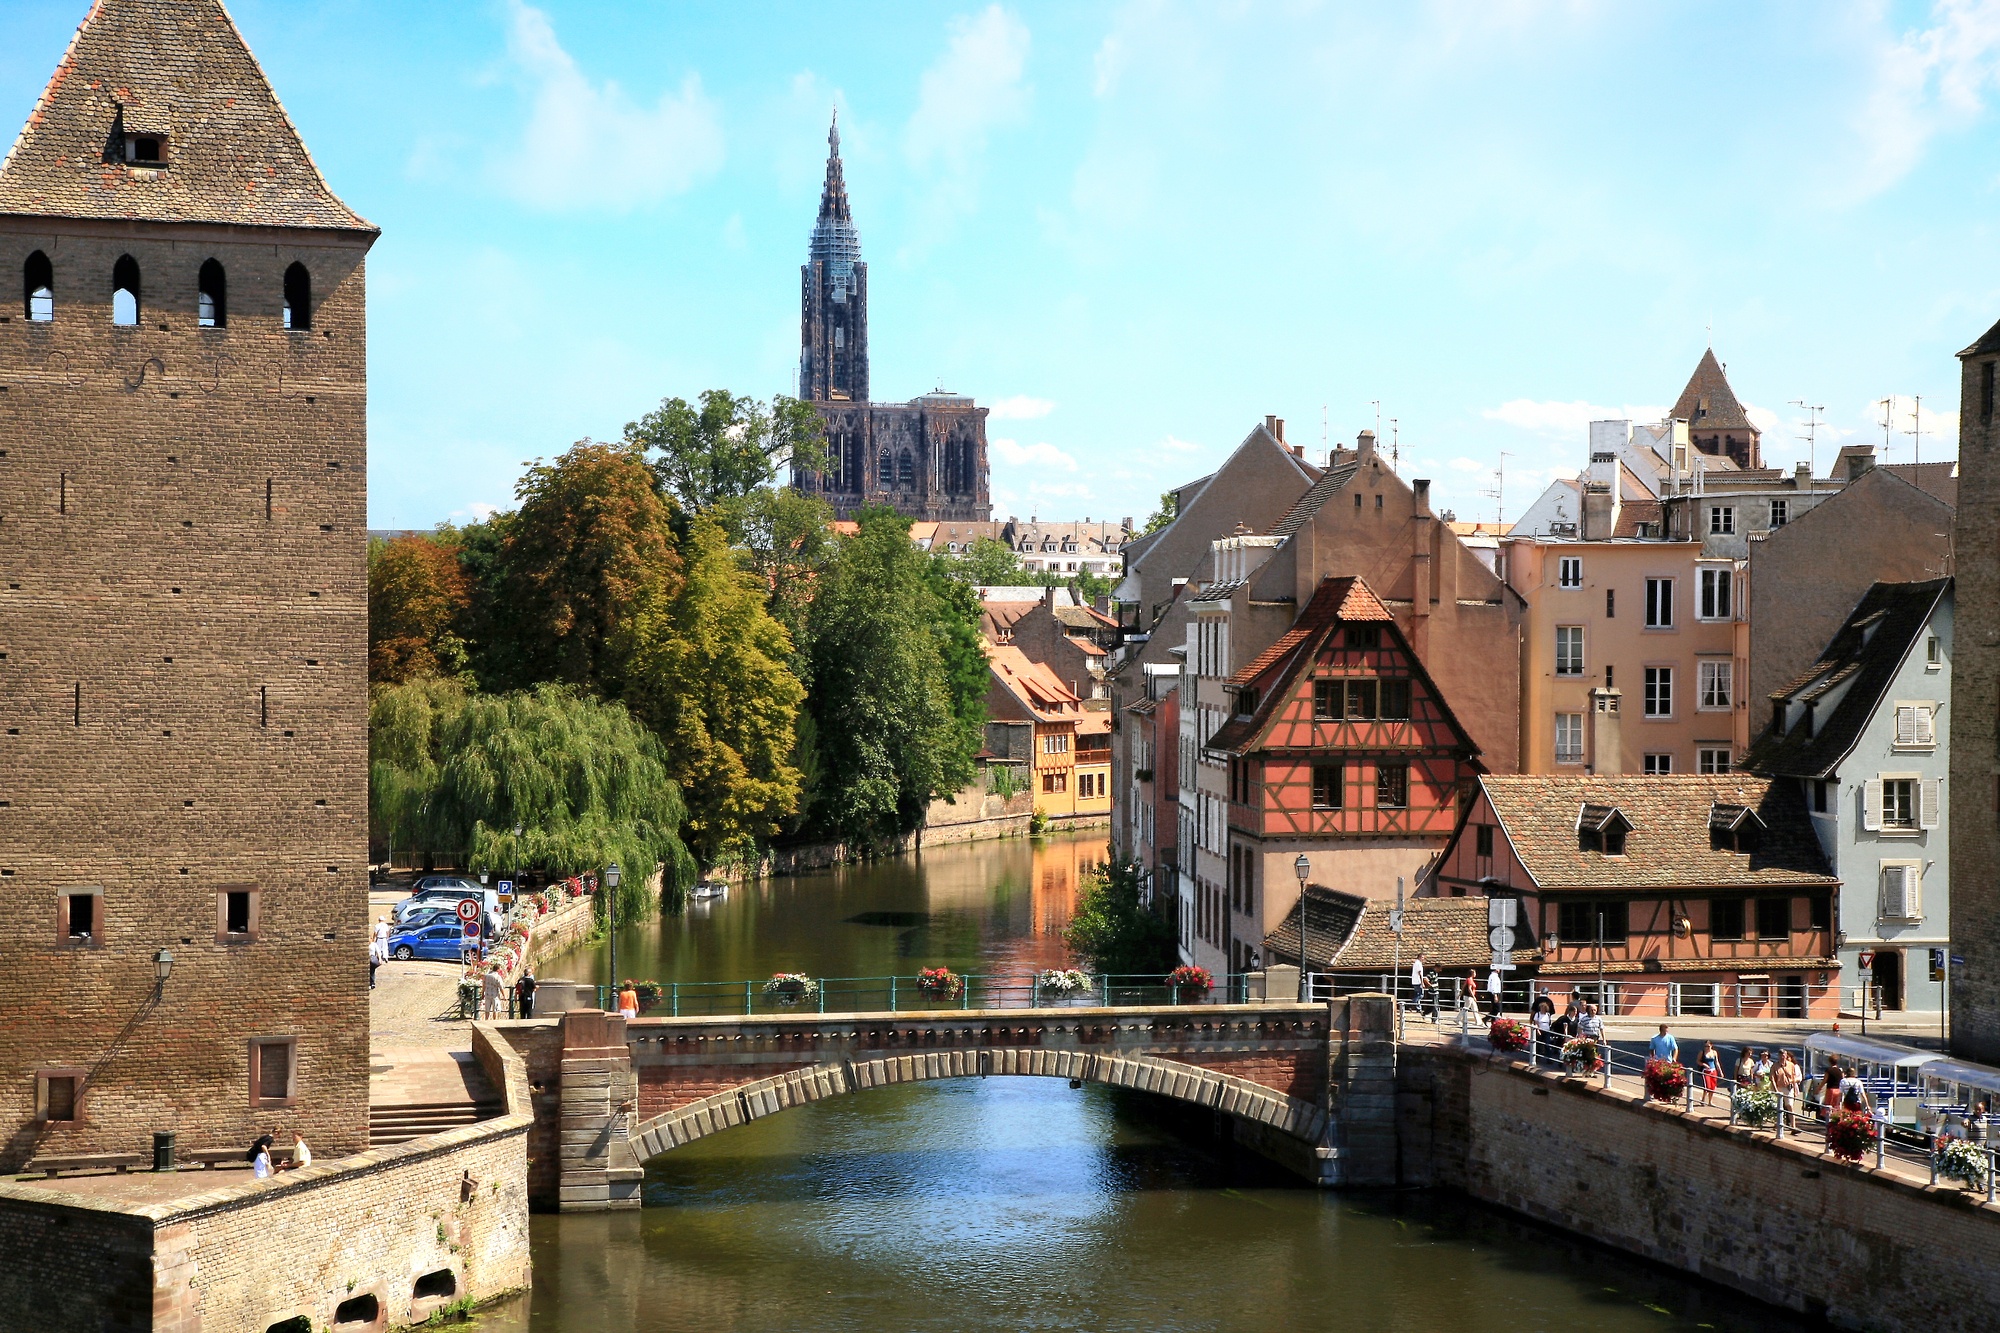 A blend of German and French architecture in Strasbourg, France